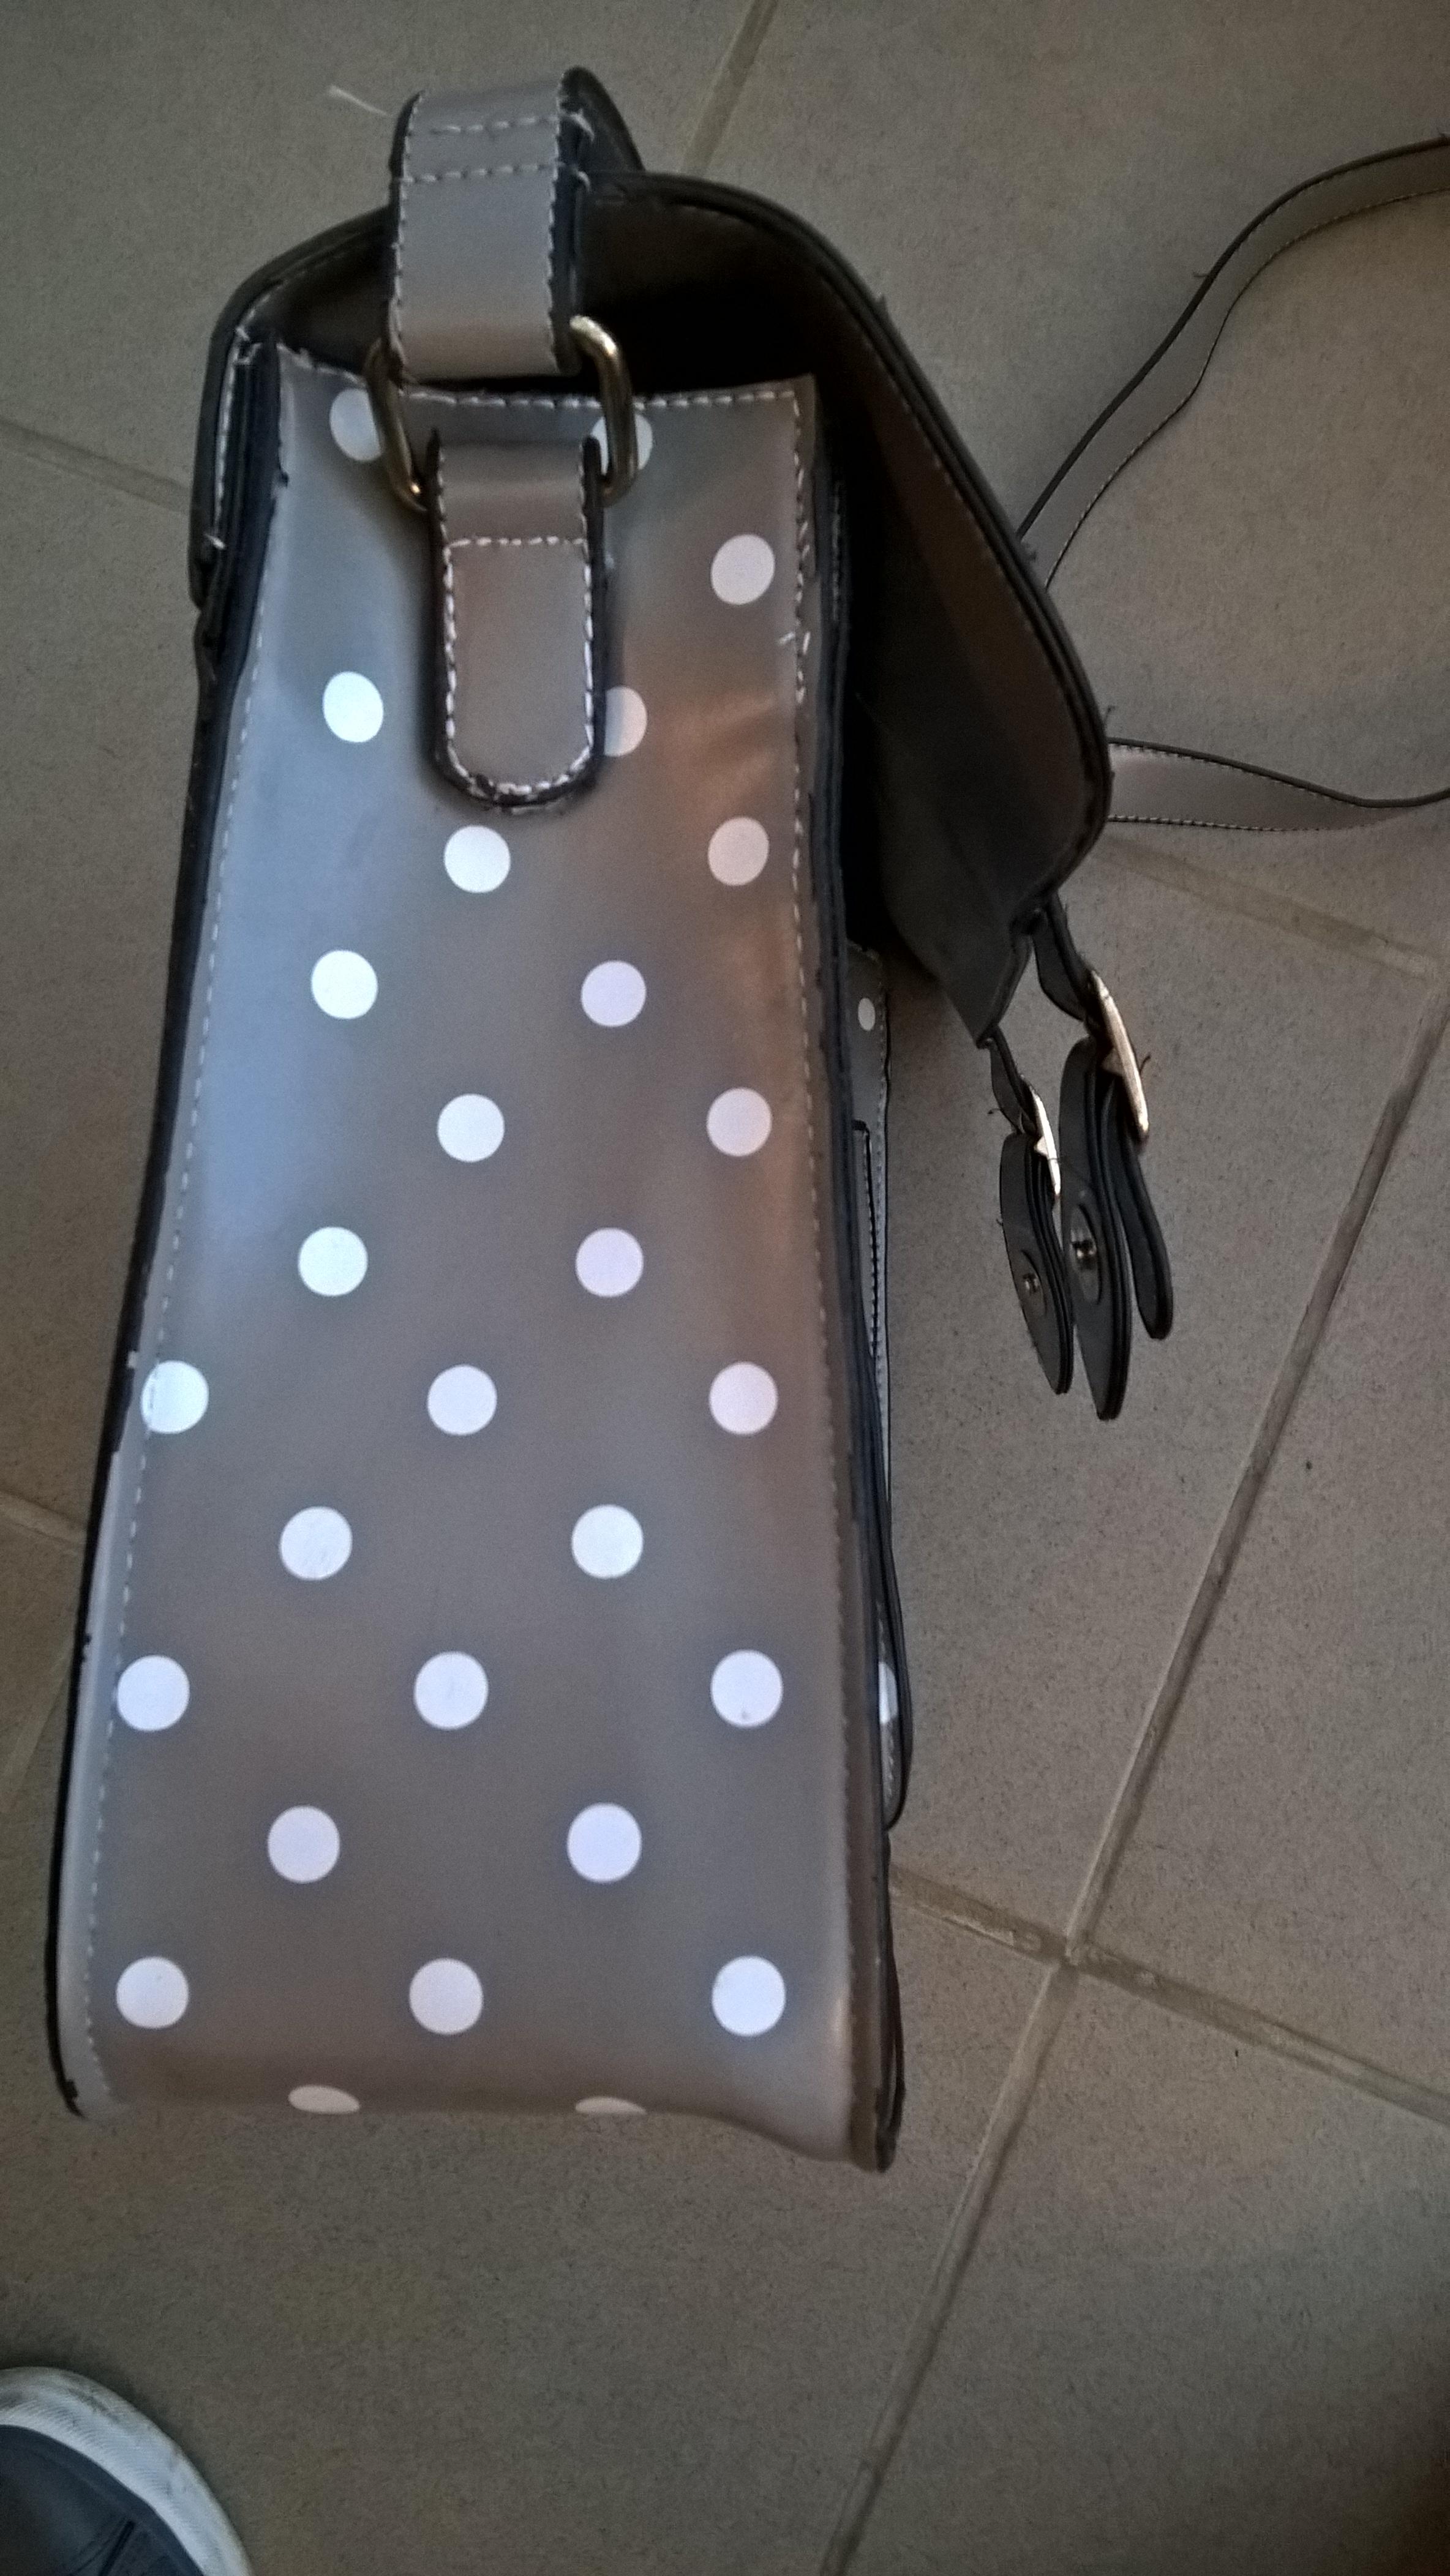 A re-sewn strap, a common repair for bags